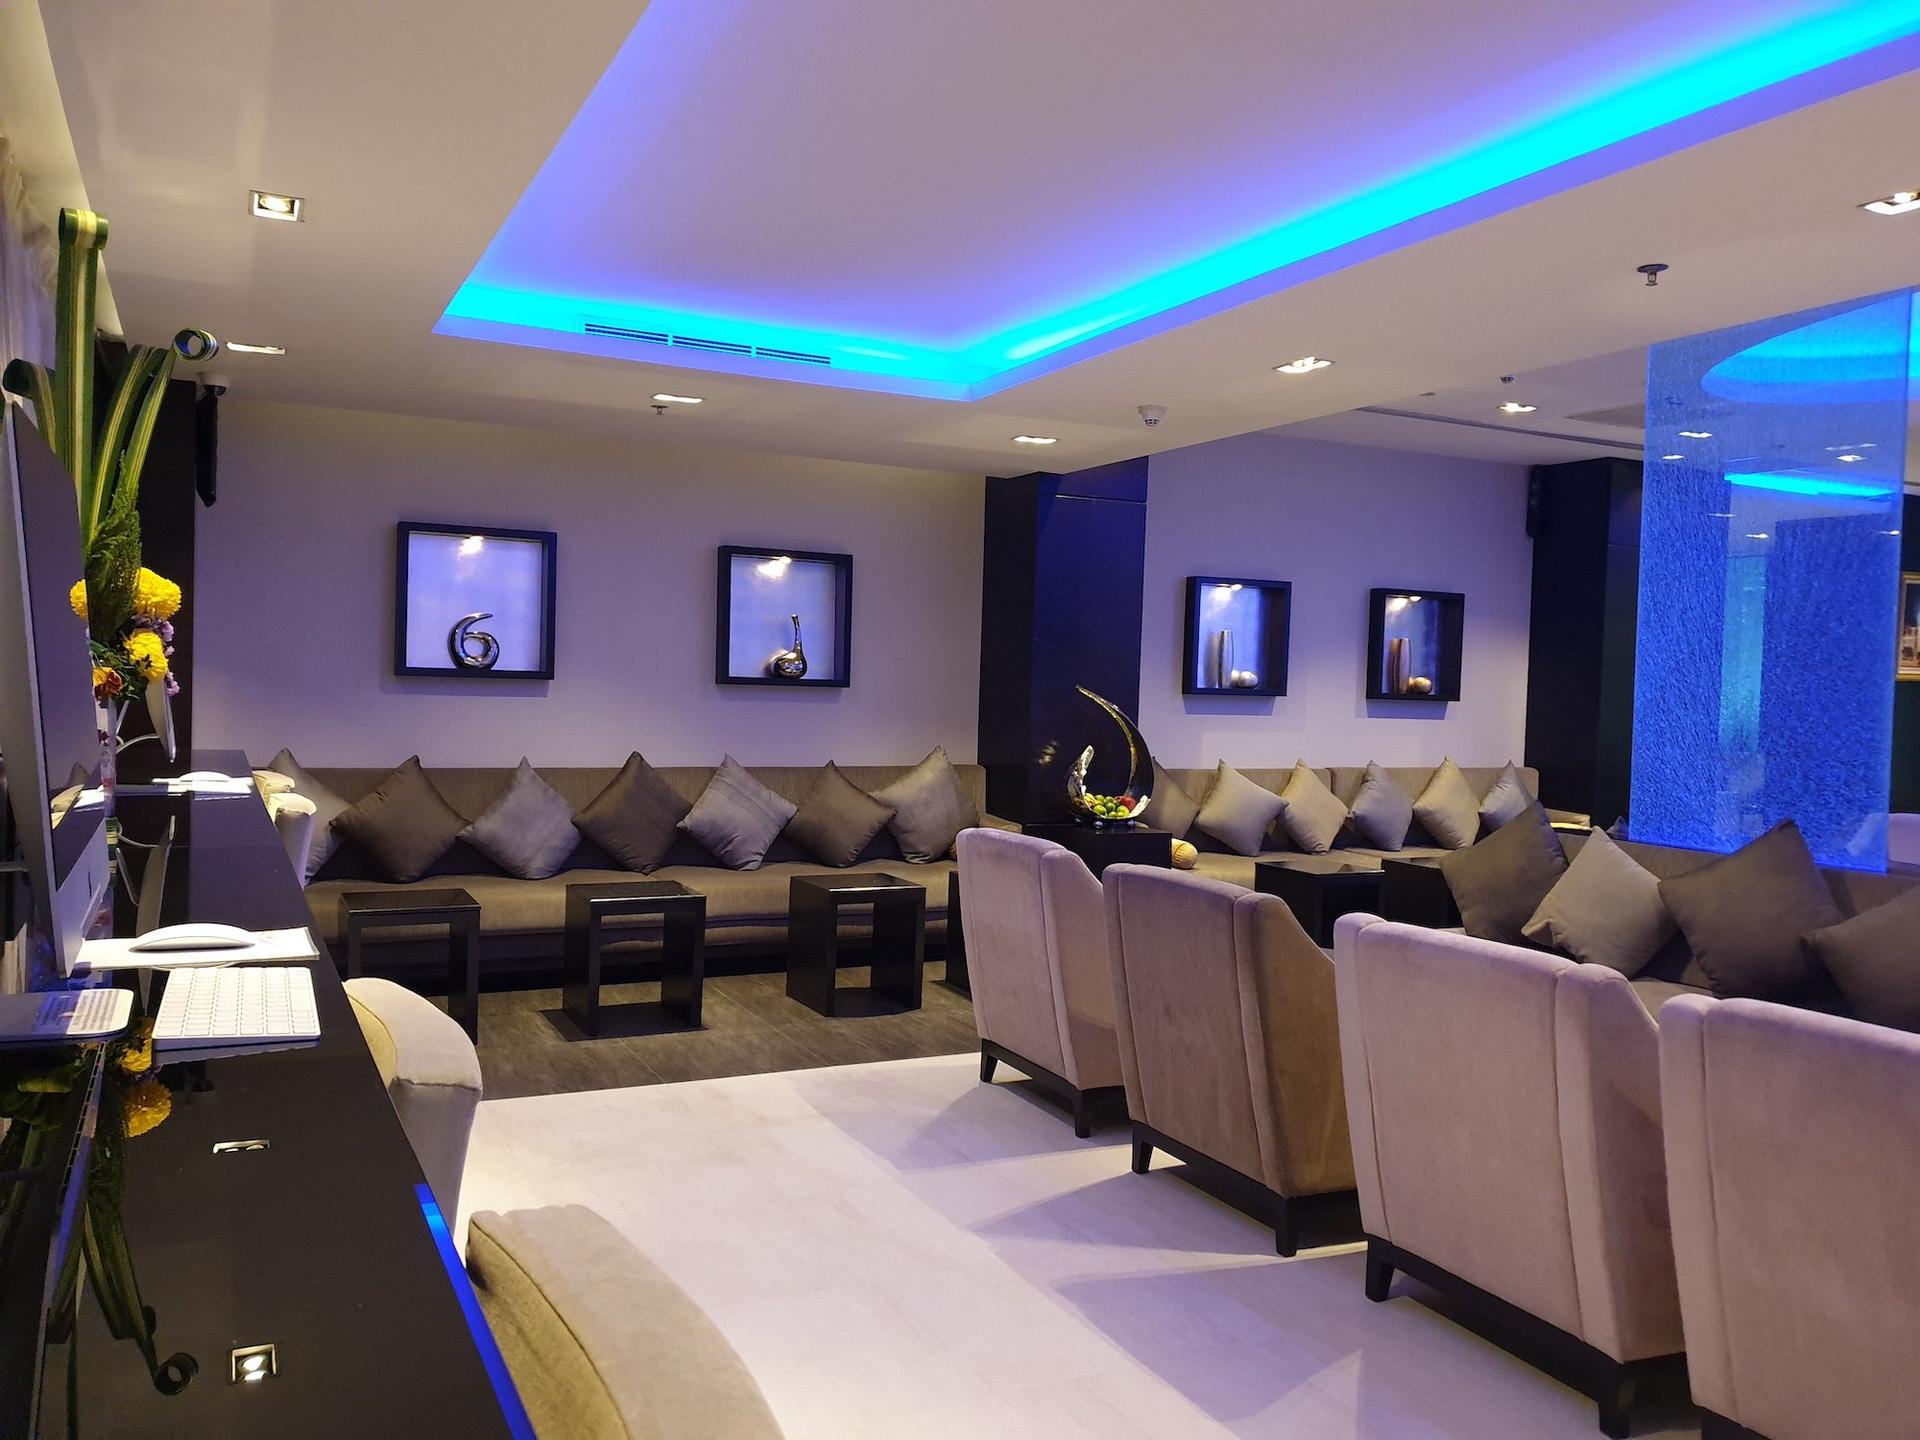 Oman Air First and Business Class Lounge image 49 of 50